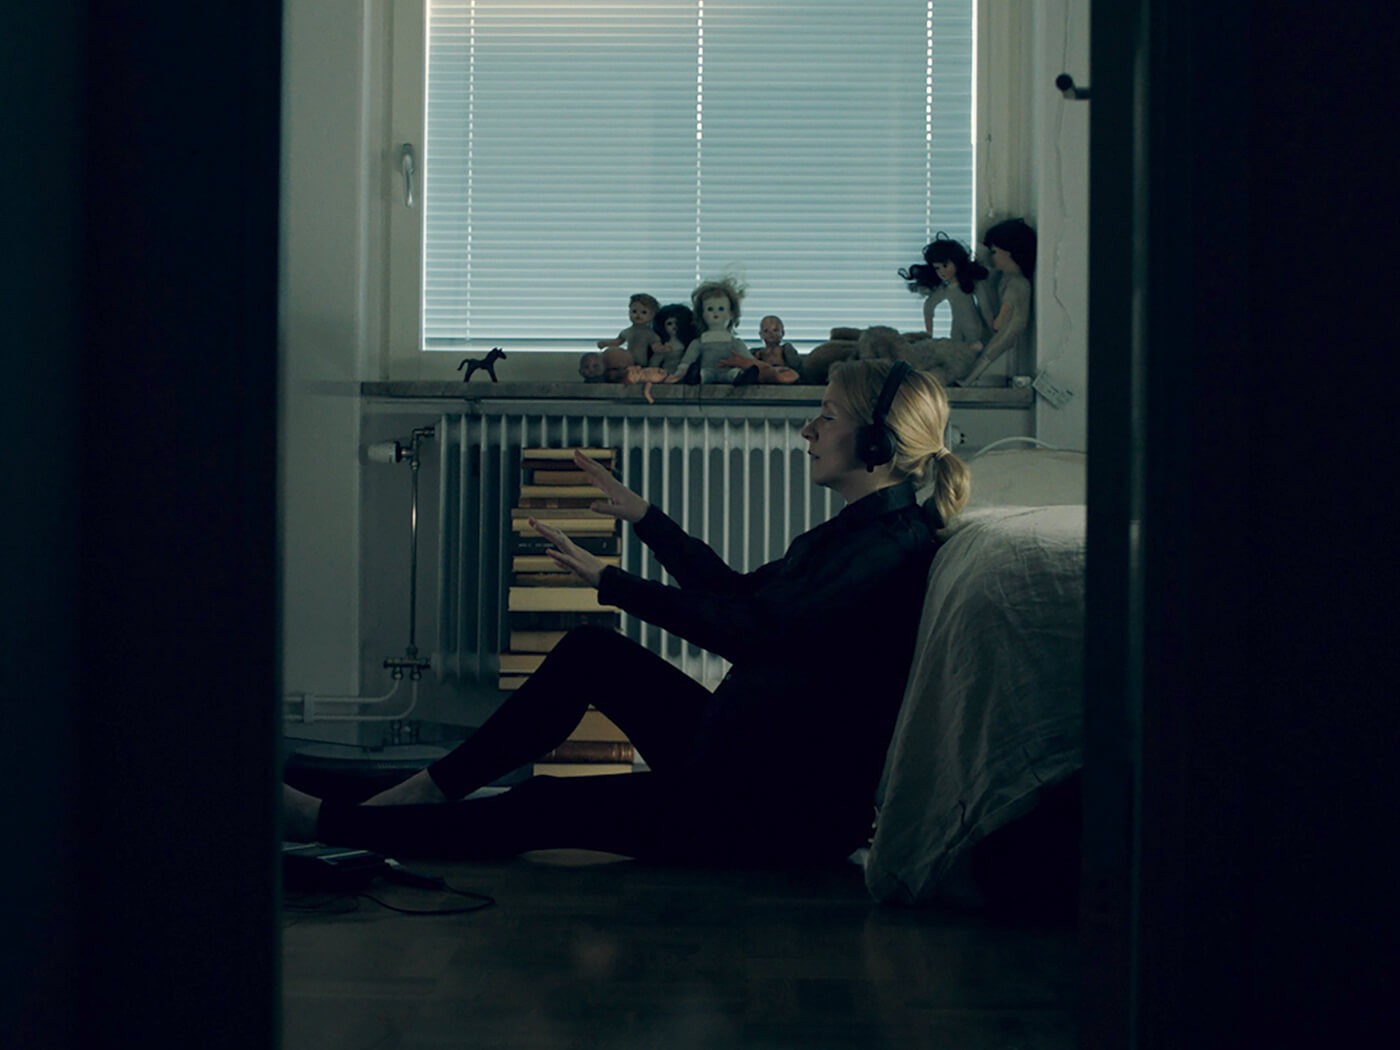 Framed shot of Jonna Lee, the artist behind iamamiwhoami, in a bedroom with headphones on and hands up